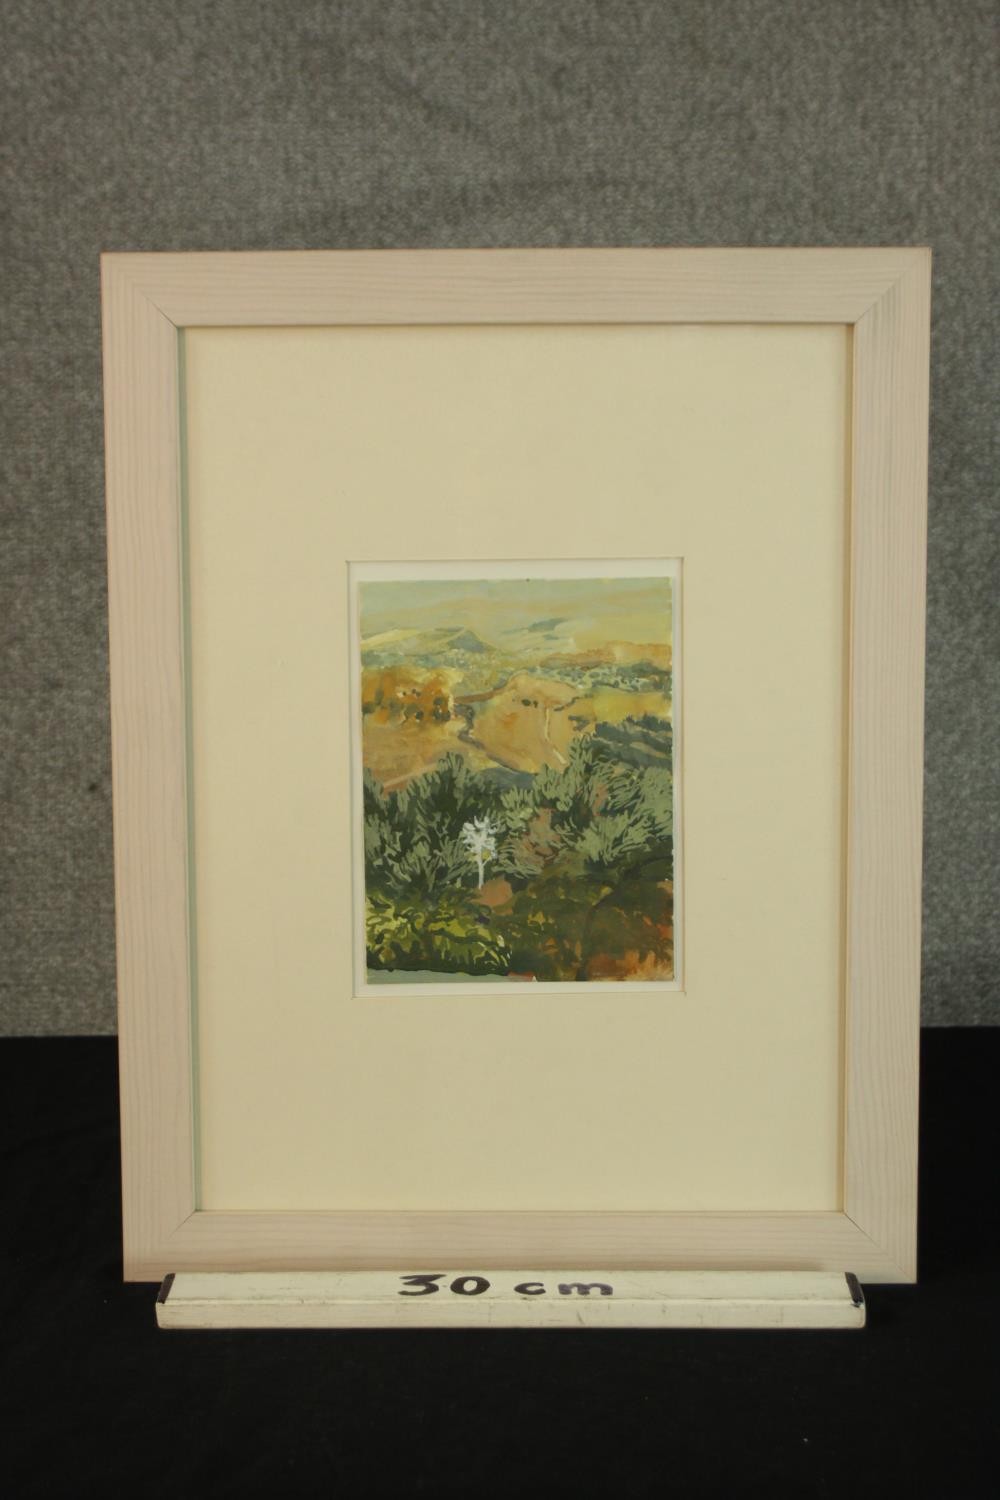 Watercolour. Landscape. Framed and glazed. Unsigned. 46 x 36 cm. - Image 3 of 4